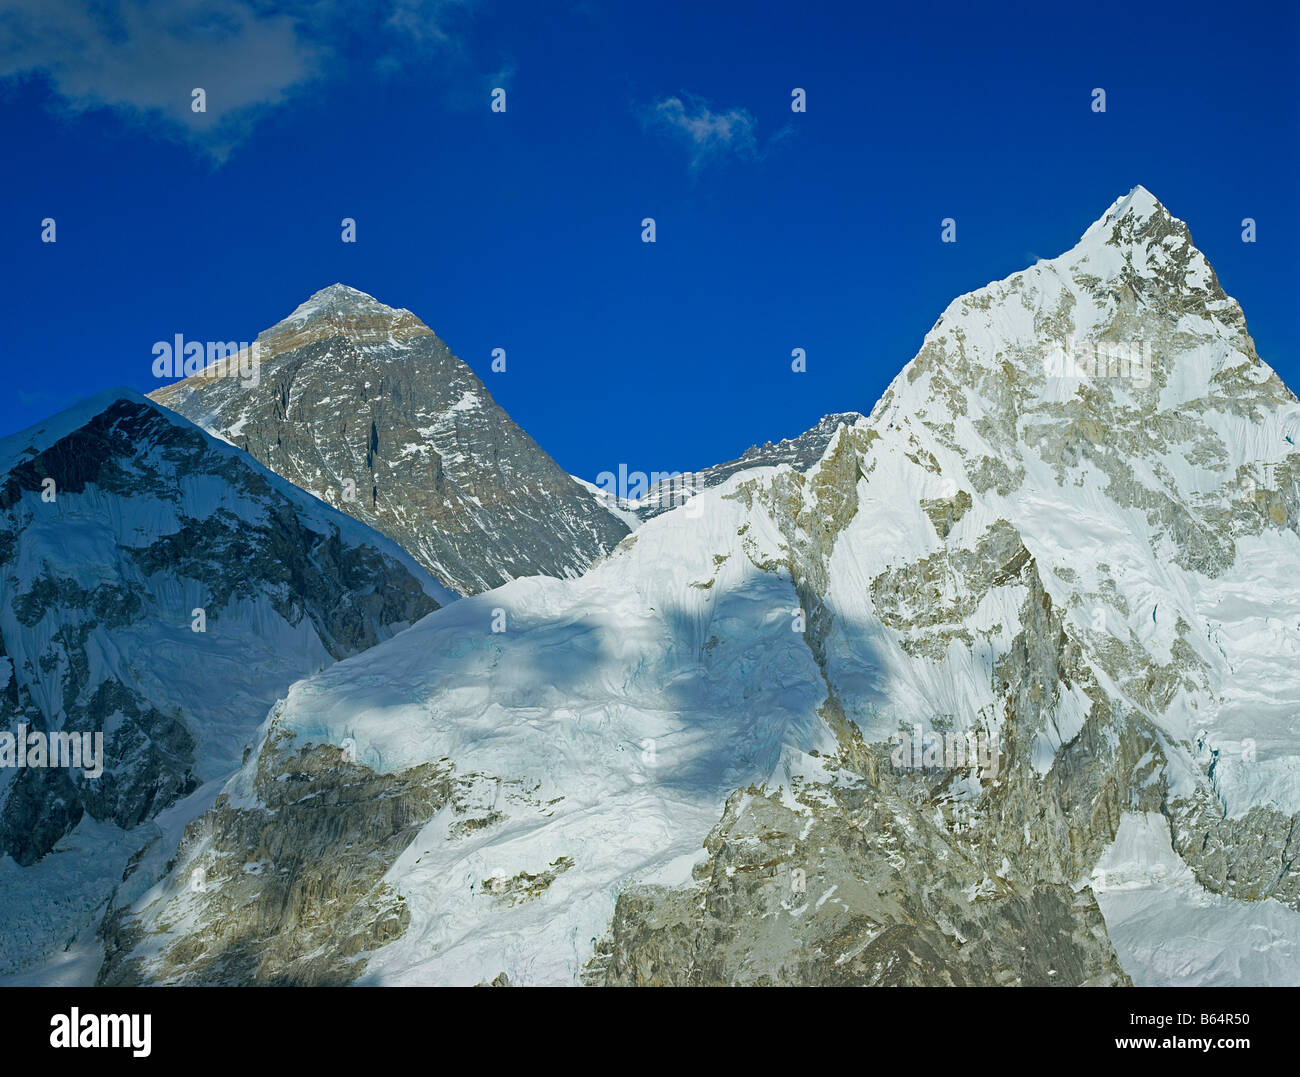 Mount Everest With Nupse And Lotse Himalayas Nepal Asia Stock Photo